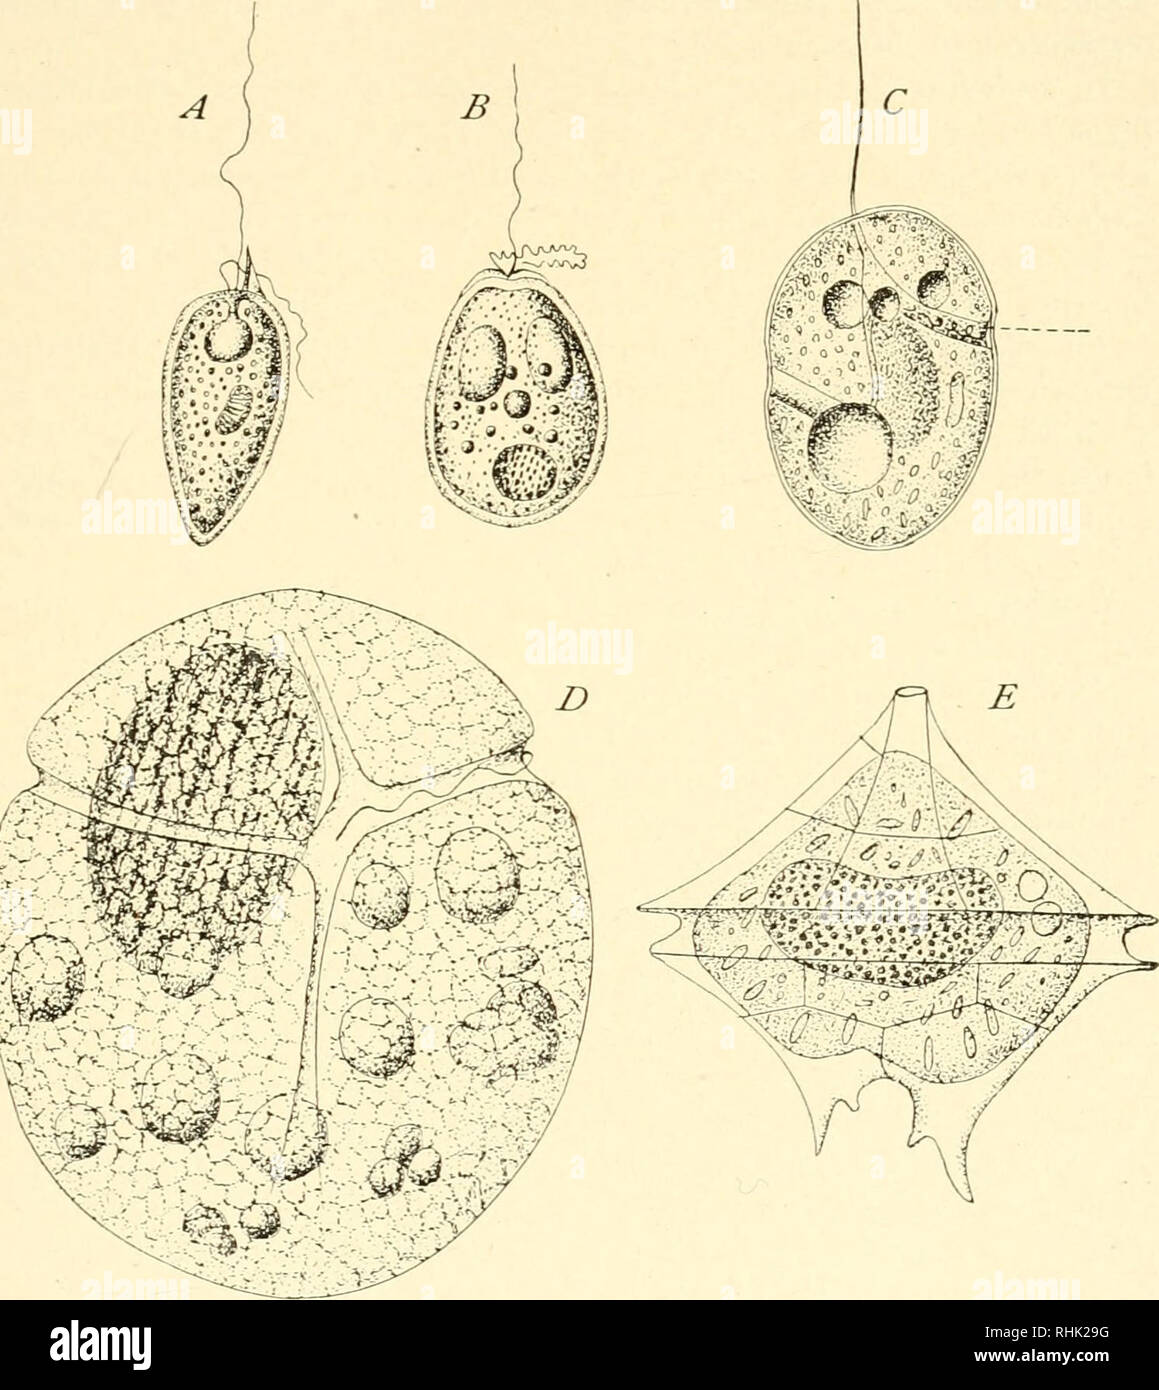 . The biology of the Protozoa. Protozoa; Protozoa. MORPHOLOGY AND TAXONOMY OF MASTIGOPHORA 269 the groove approaches the anterior end and finally disappears entirely from the cell. In Prorocentnim (Fig. 129, A) there is an anterior spur-like process about which the transverse flagellum vibrates as though in a groove, while in Exuimlla even this spur is absent but the flagellum vibrates in a plane at right angles to the. Fig. 129.—Types of Diiioflagellida. A, Prorocentrum micans; B, ExuviwUa marina; C, Gyrodinium ovum; D, Gyinnodinium sphcericum; E, Pcridinium divergens. (A, after Blitschli; B, Stock Photo